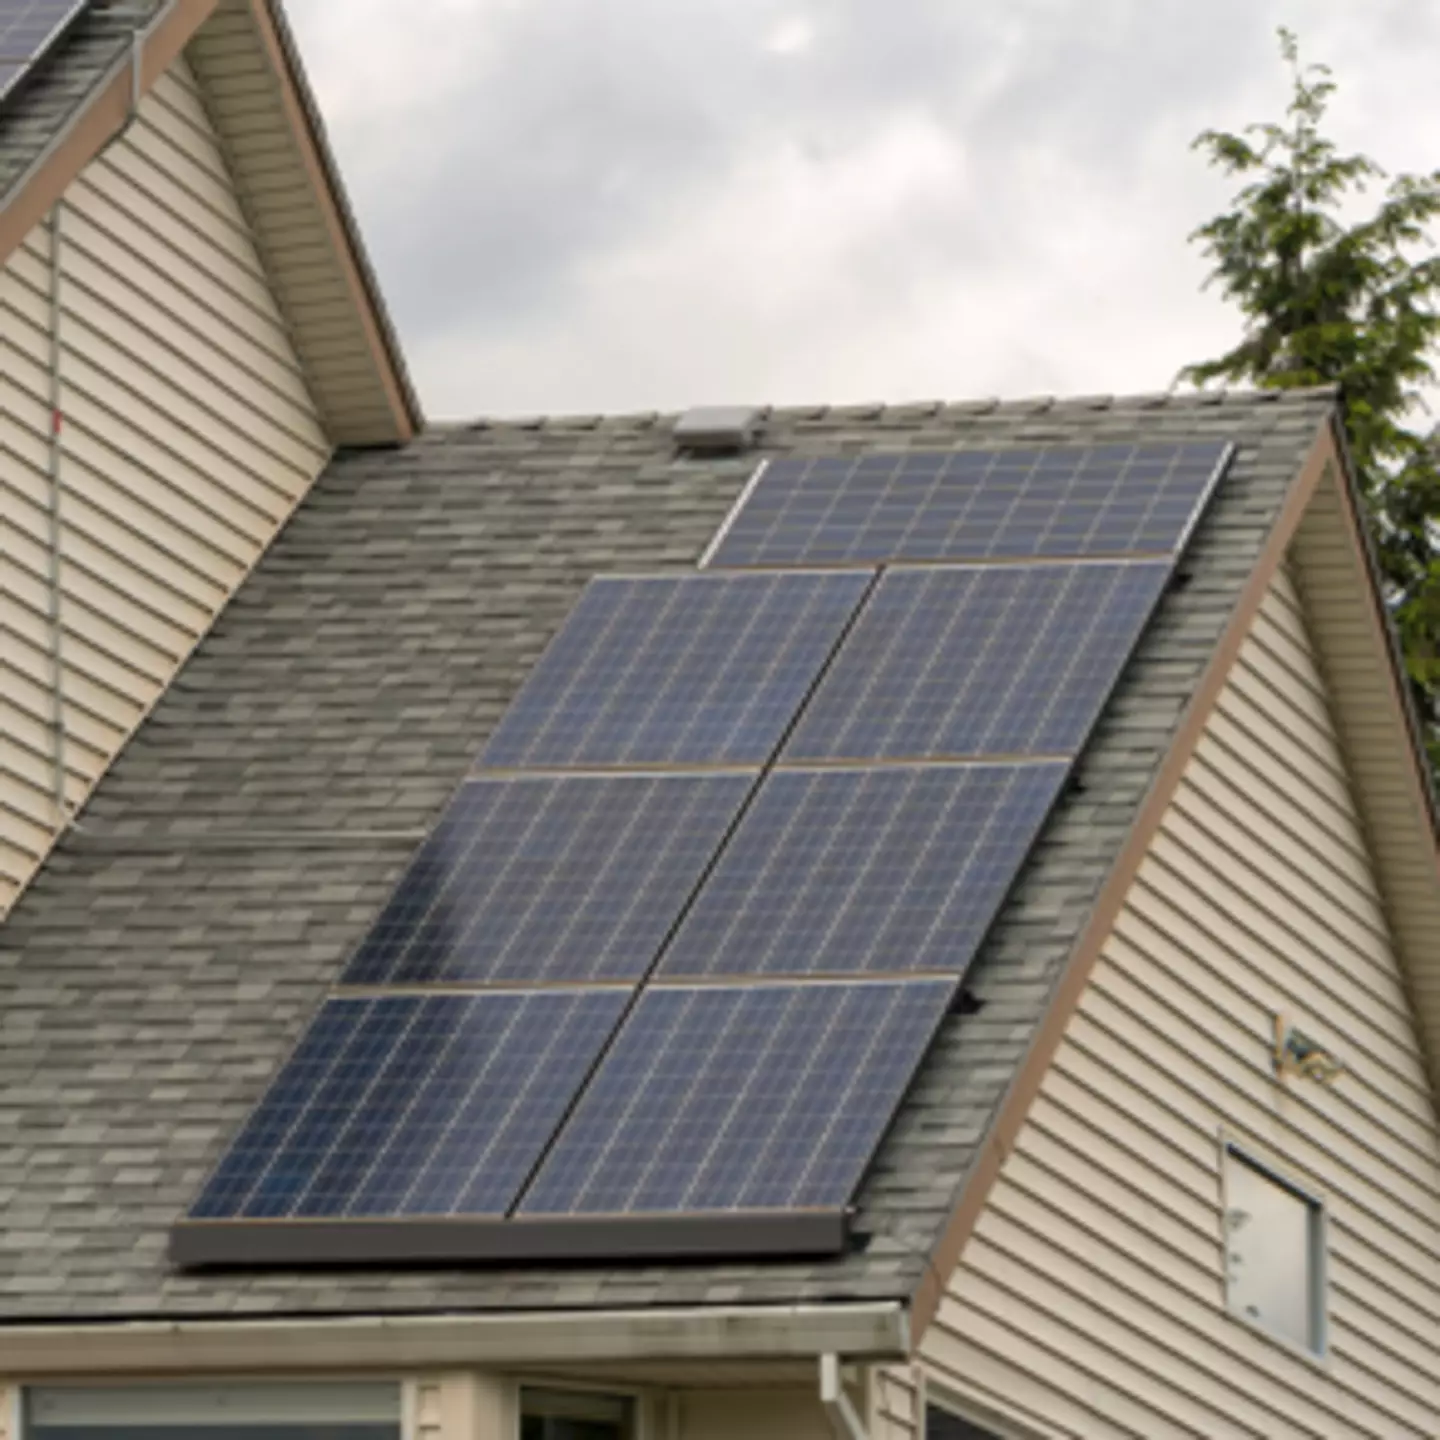 Reddit user shares their energy bill before and after installing solar panels and the difference is insane